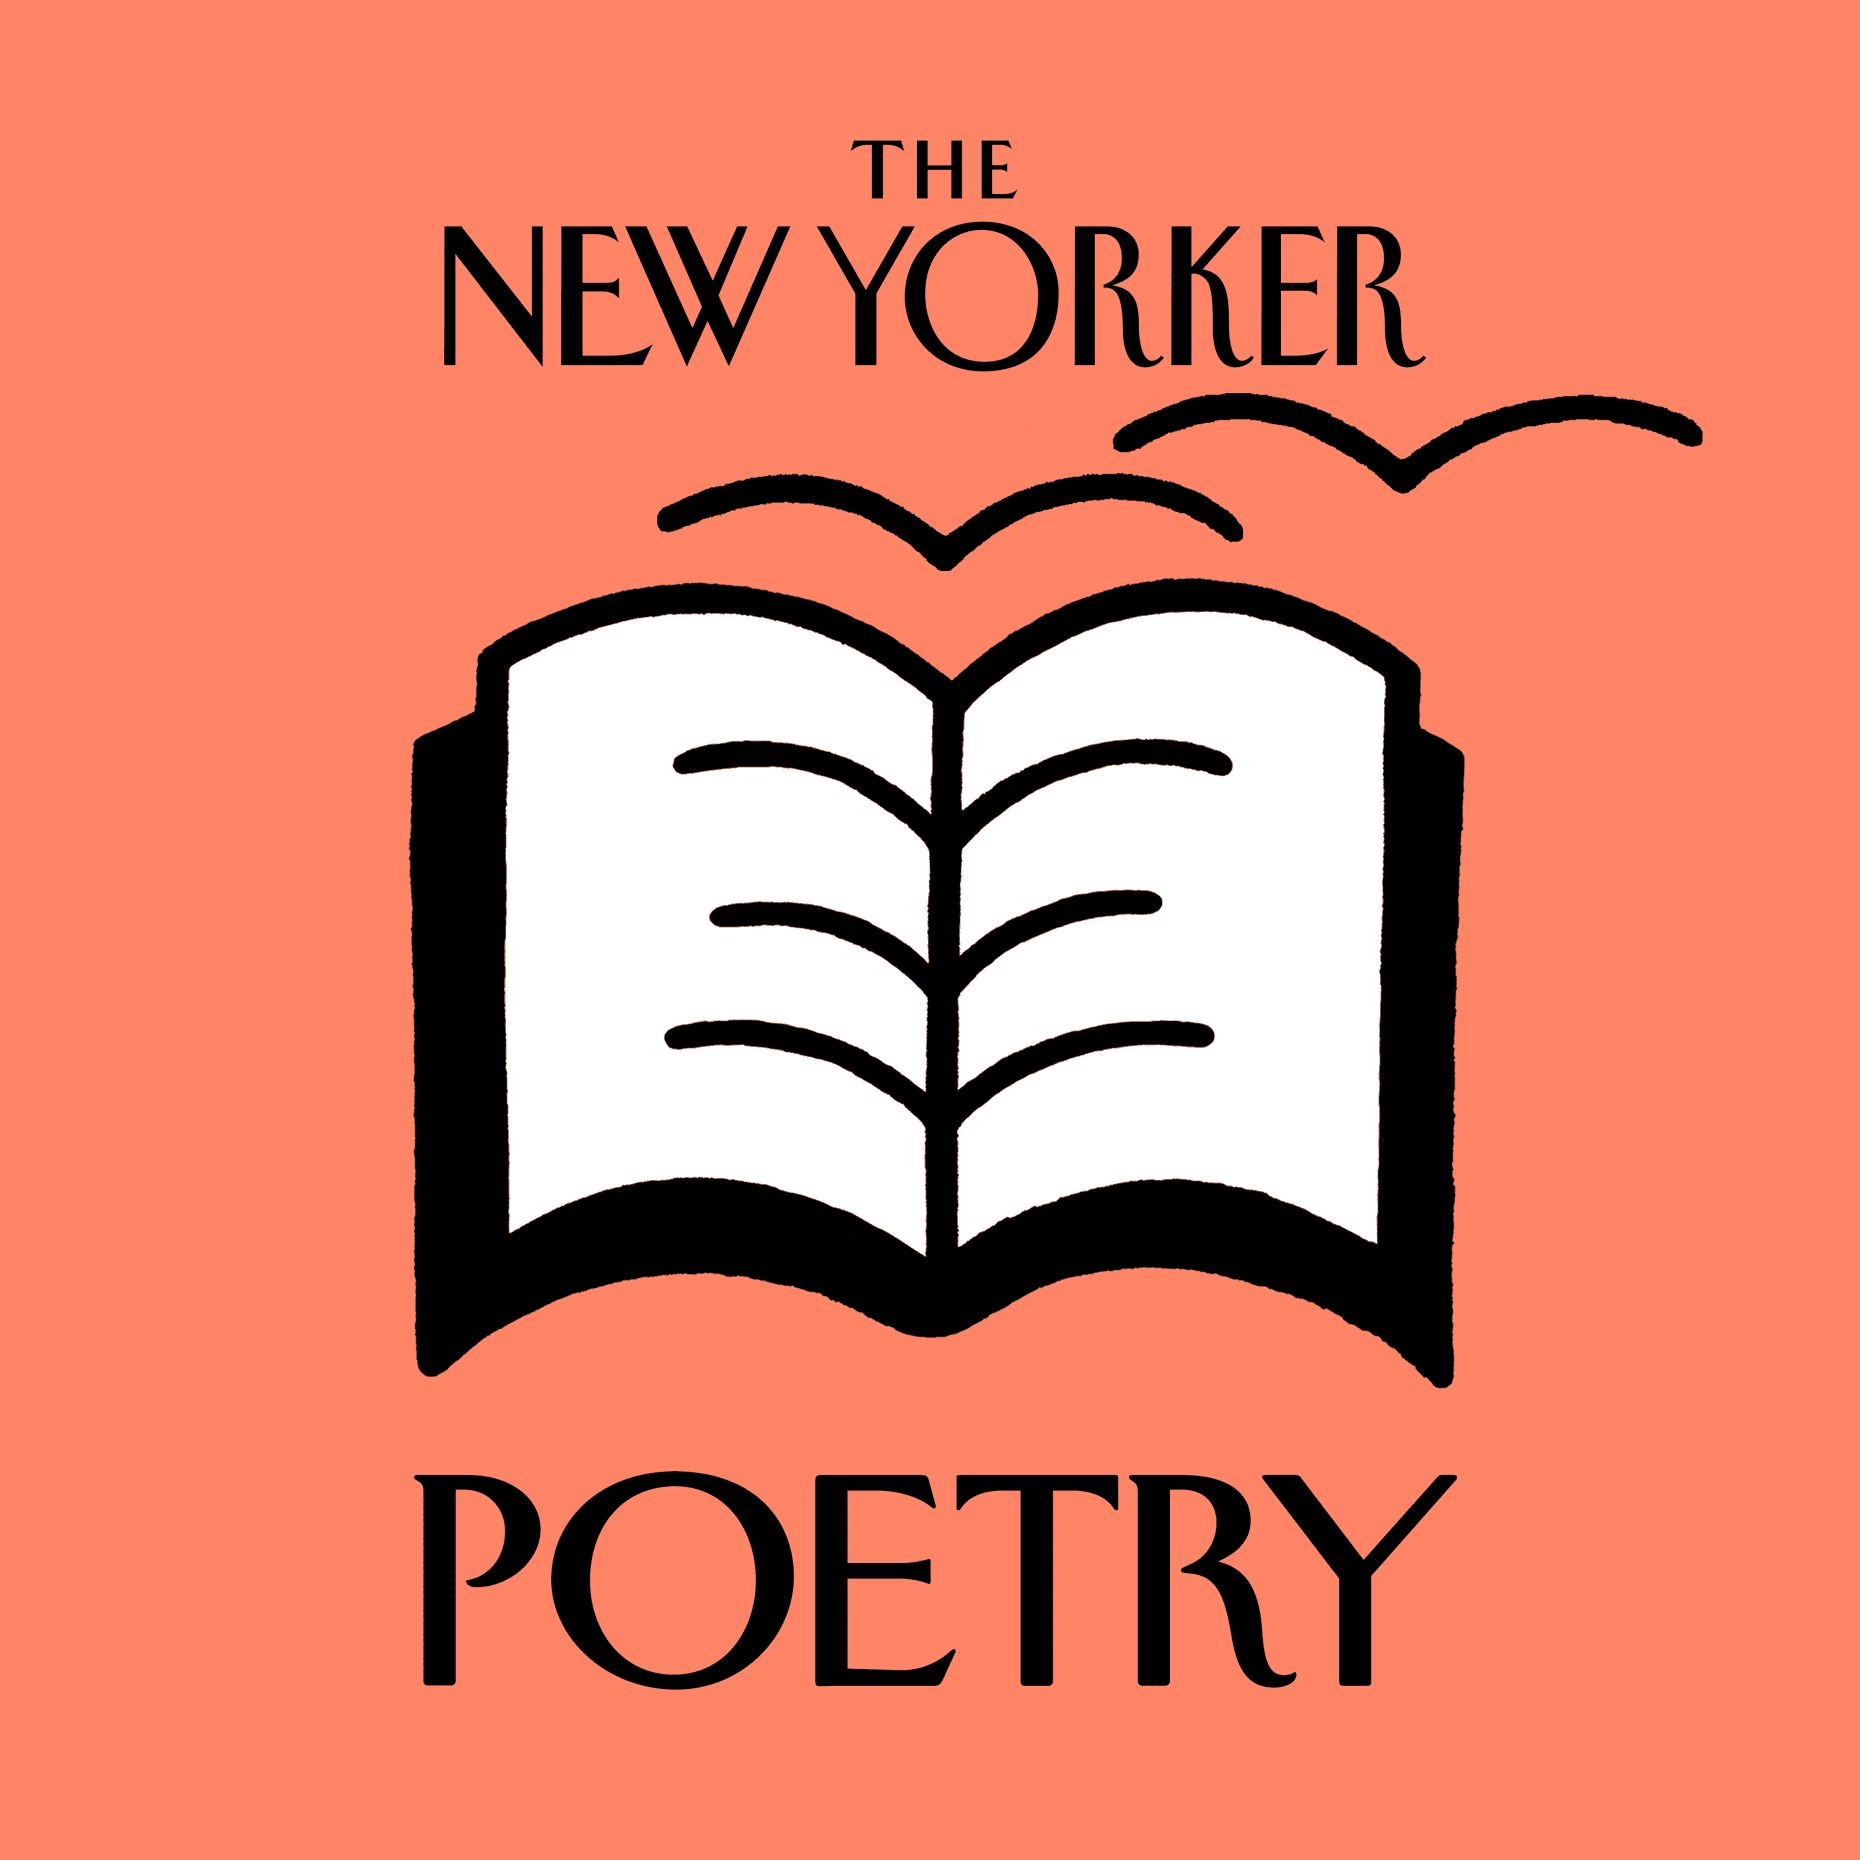 The New Yorker: Poetry podcast show image